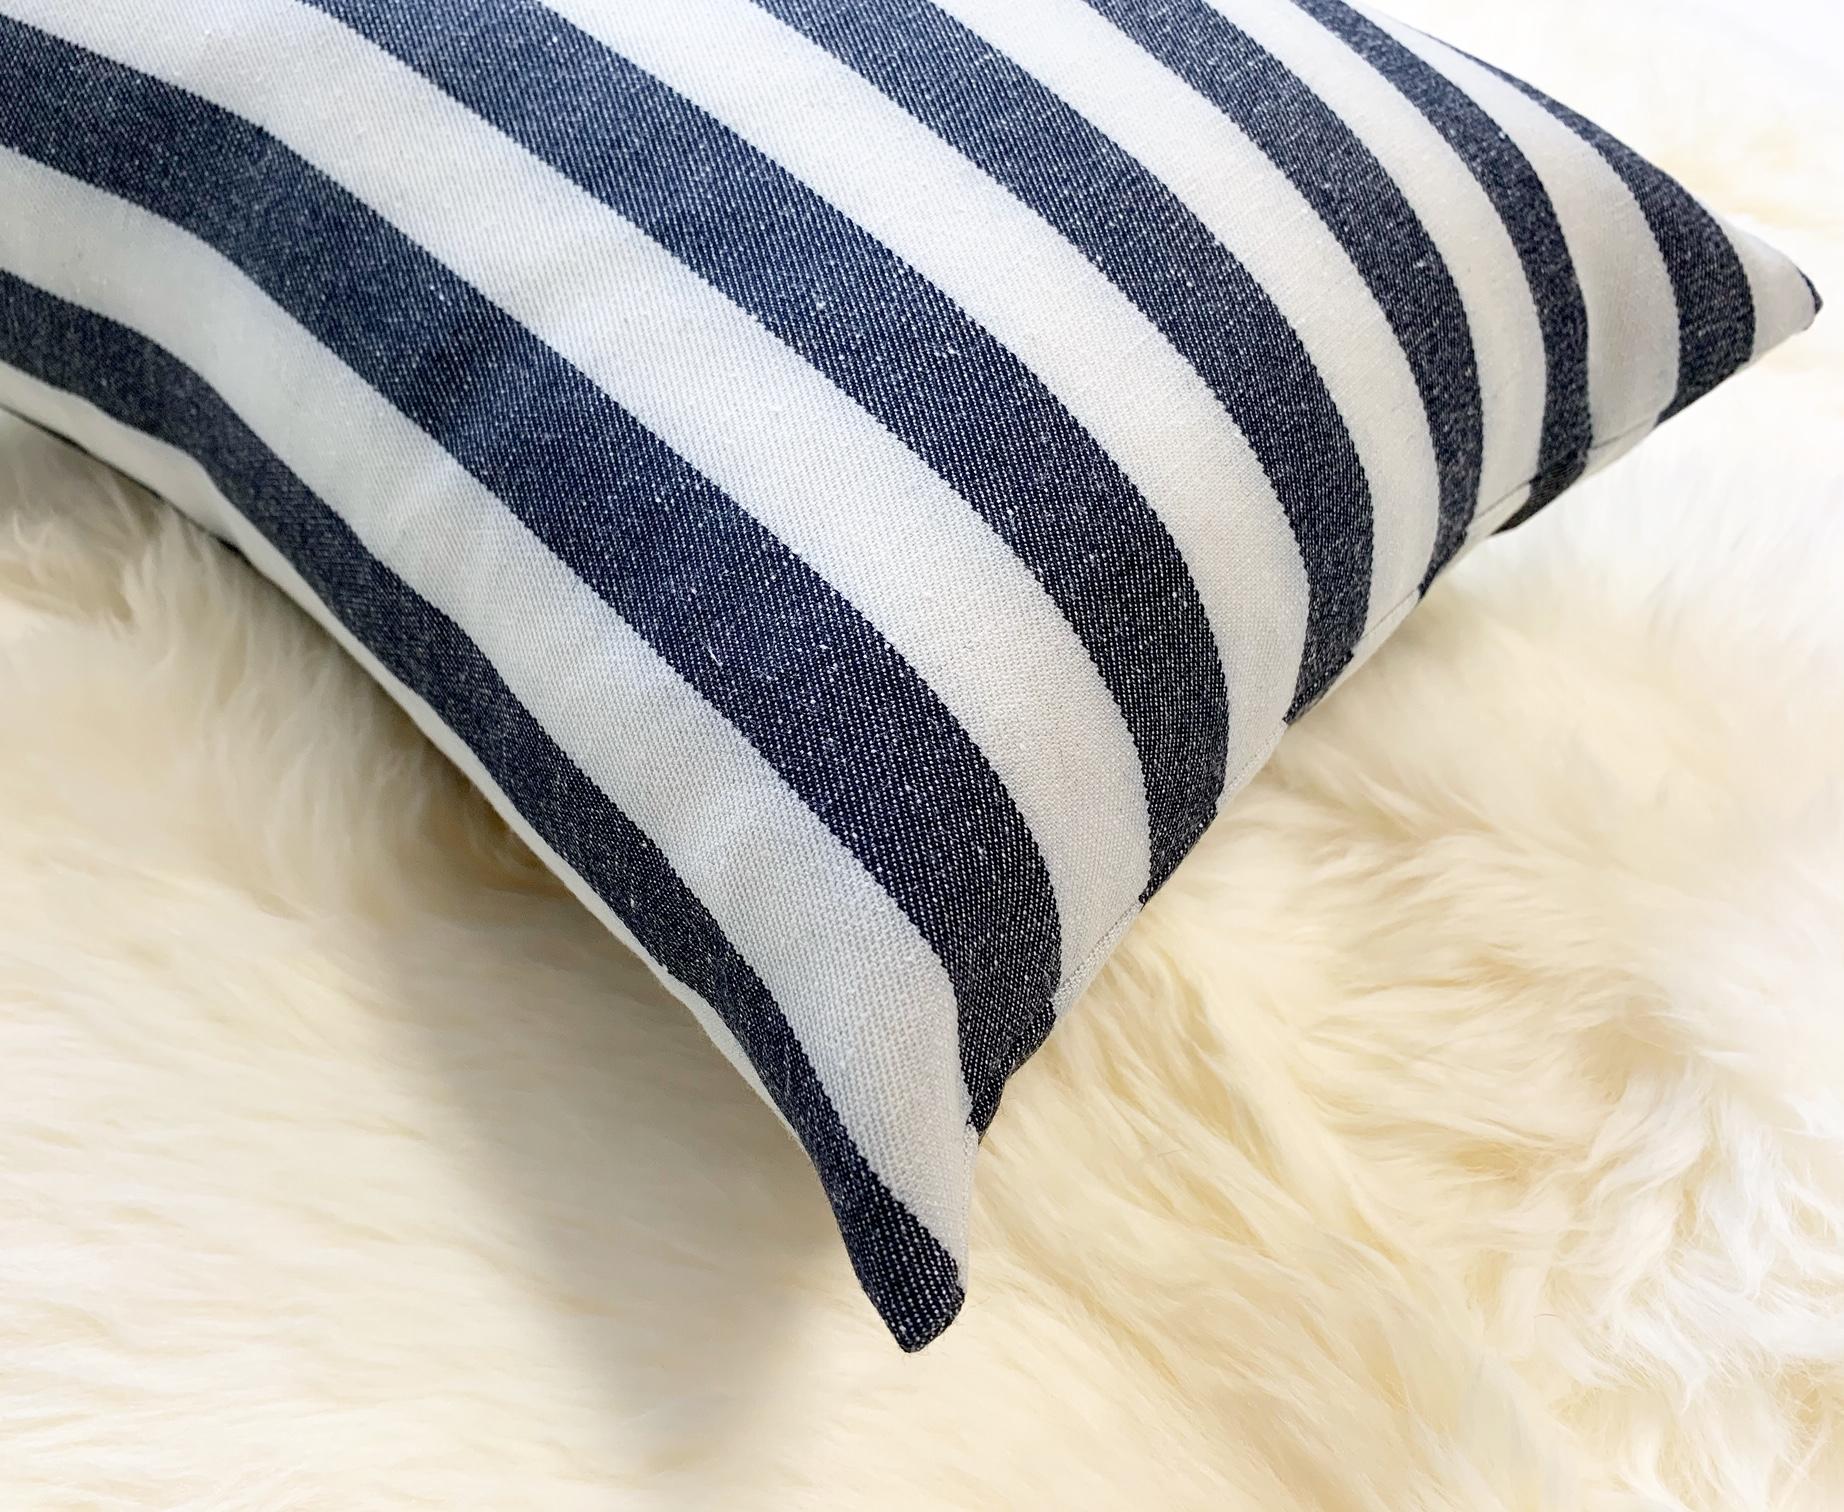 Kule's incredibly chic stripe fabric was used to make this beautiful pillow crafted in our Saint Louis studio. Down feather insert included. Measures: 11 x 16”.